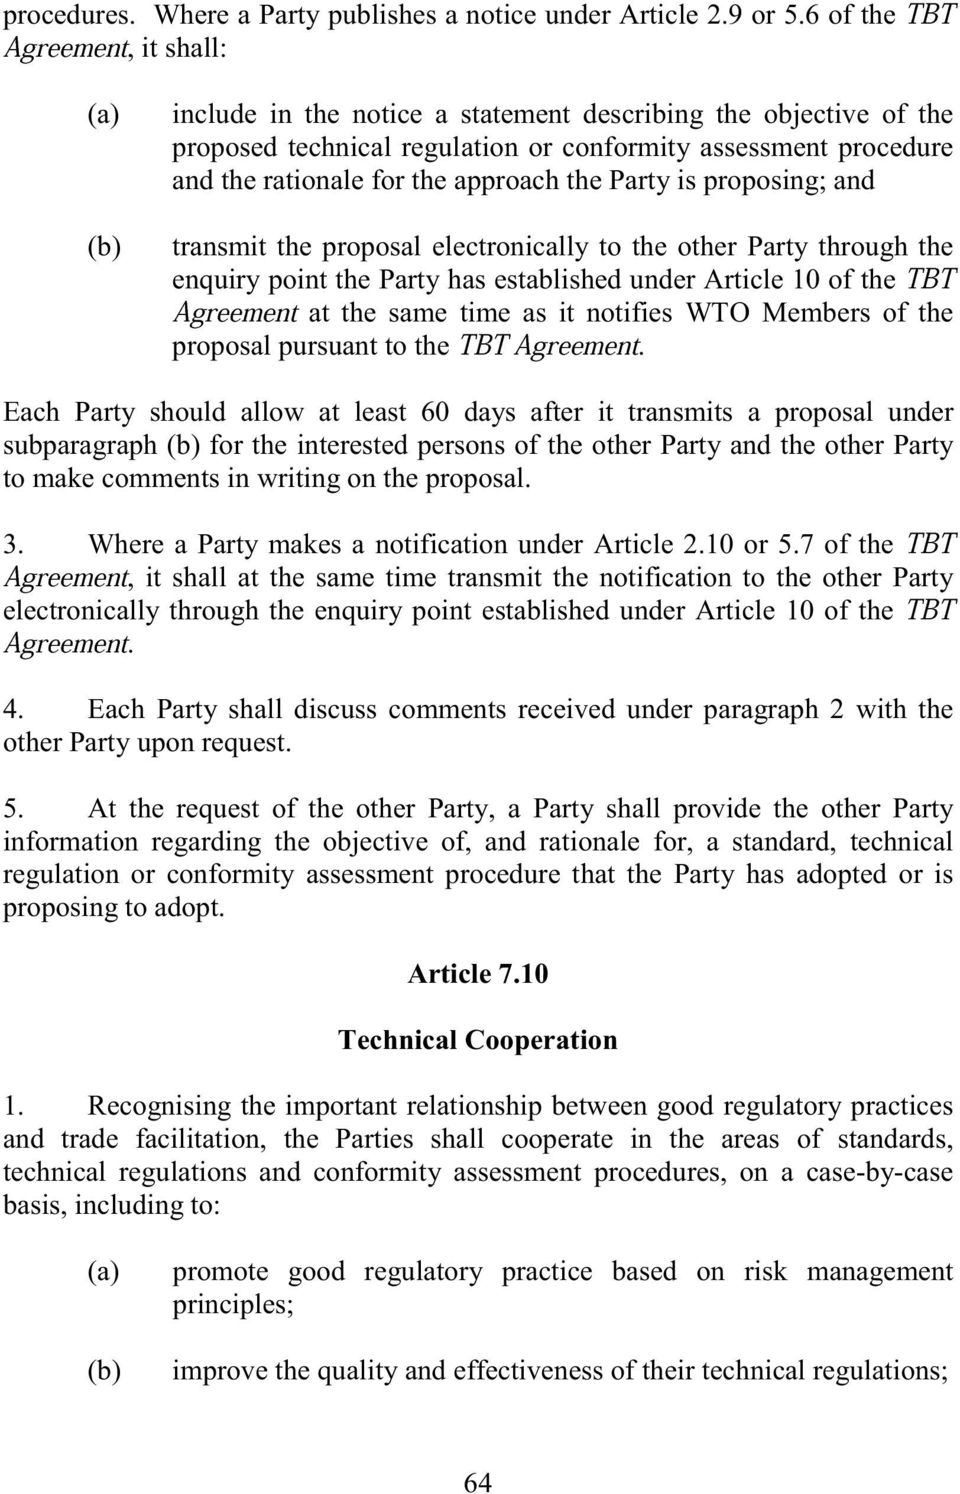 the Party is proposing; and transmit the proposal electronically to the other Party through the enquiry point the Party has established under Article 10 of the TBT Agreement at the same time as it